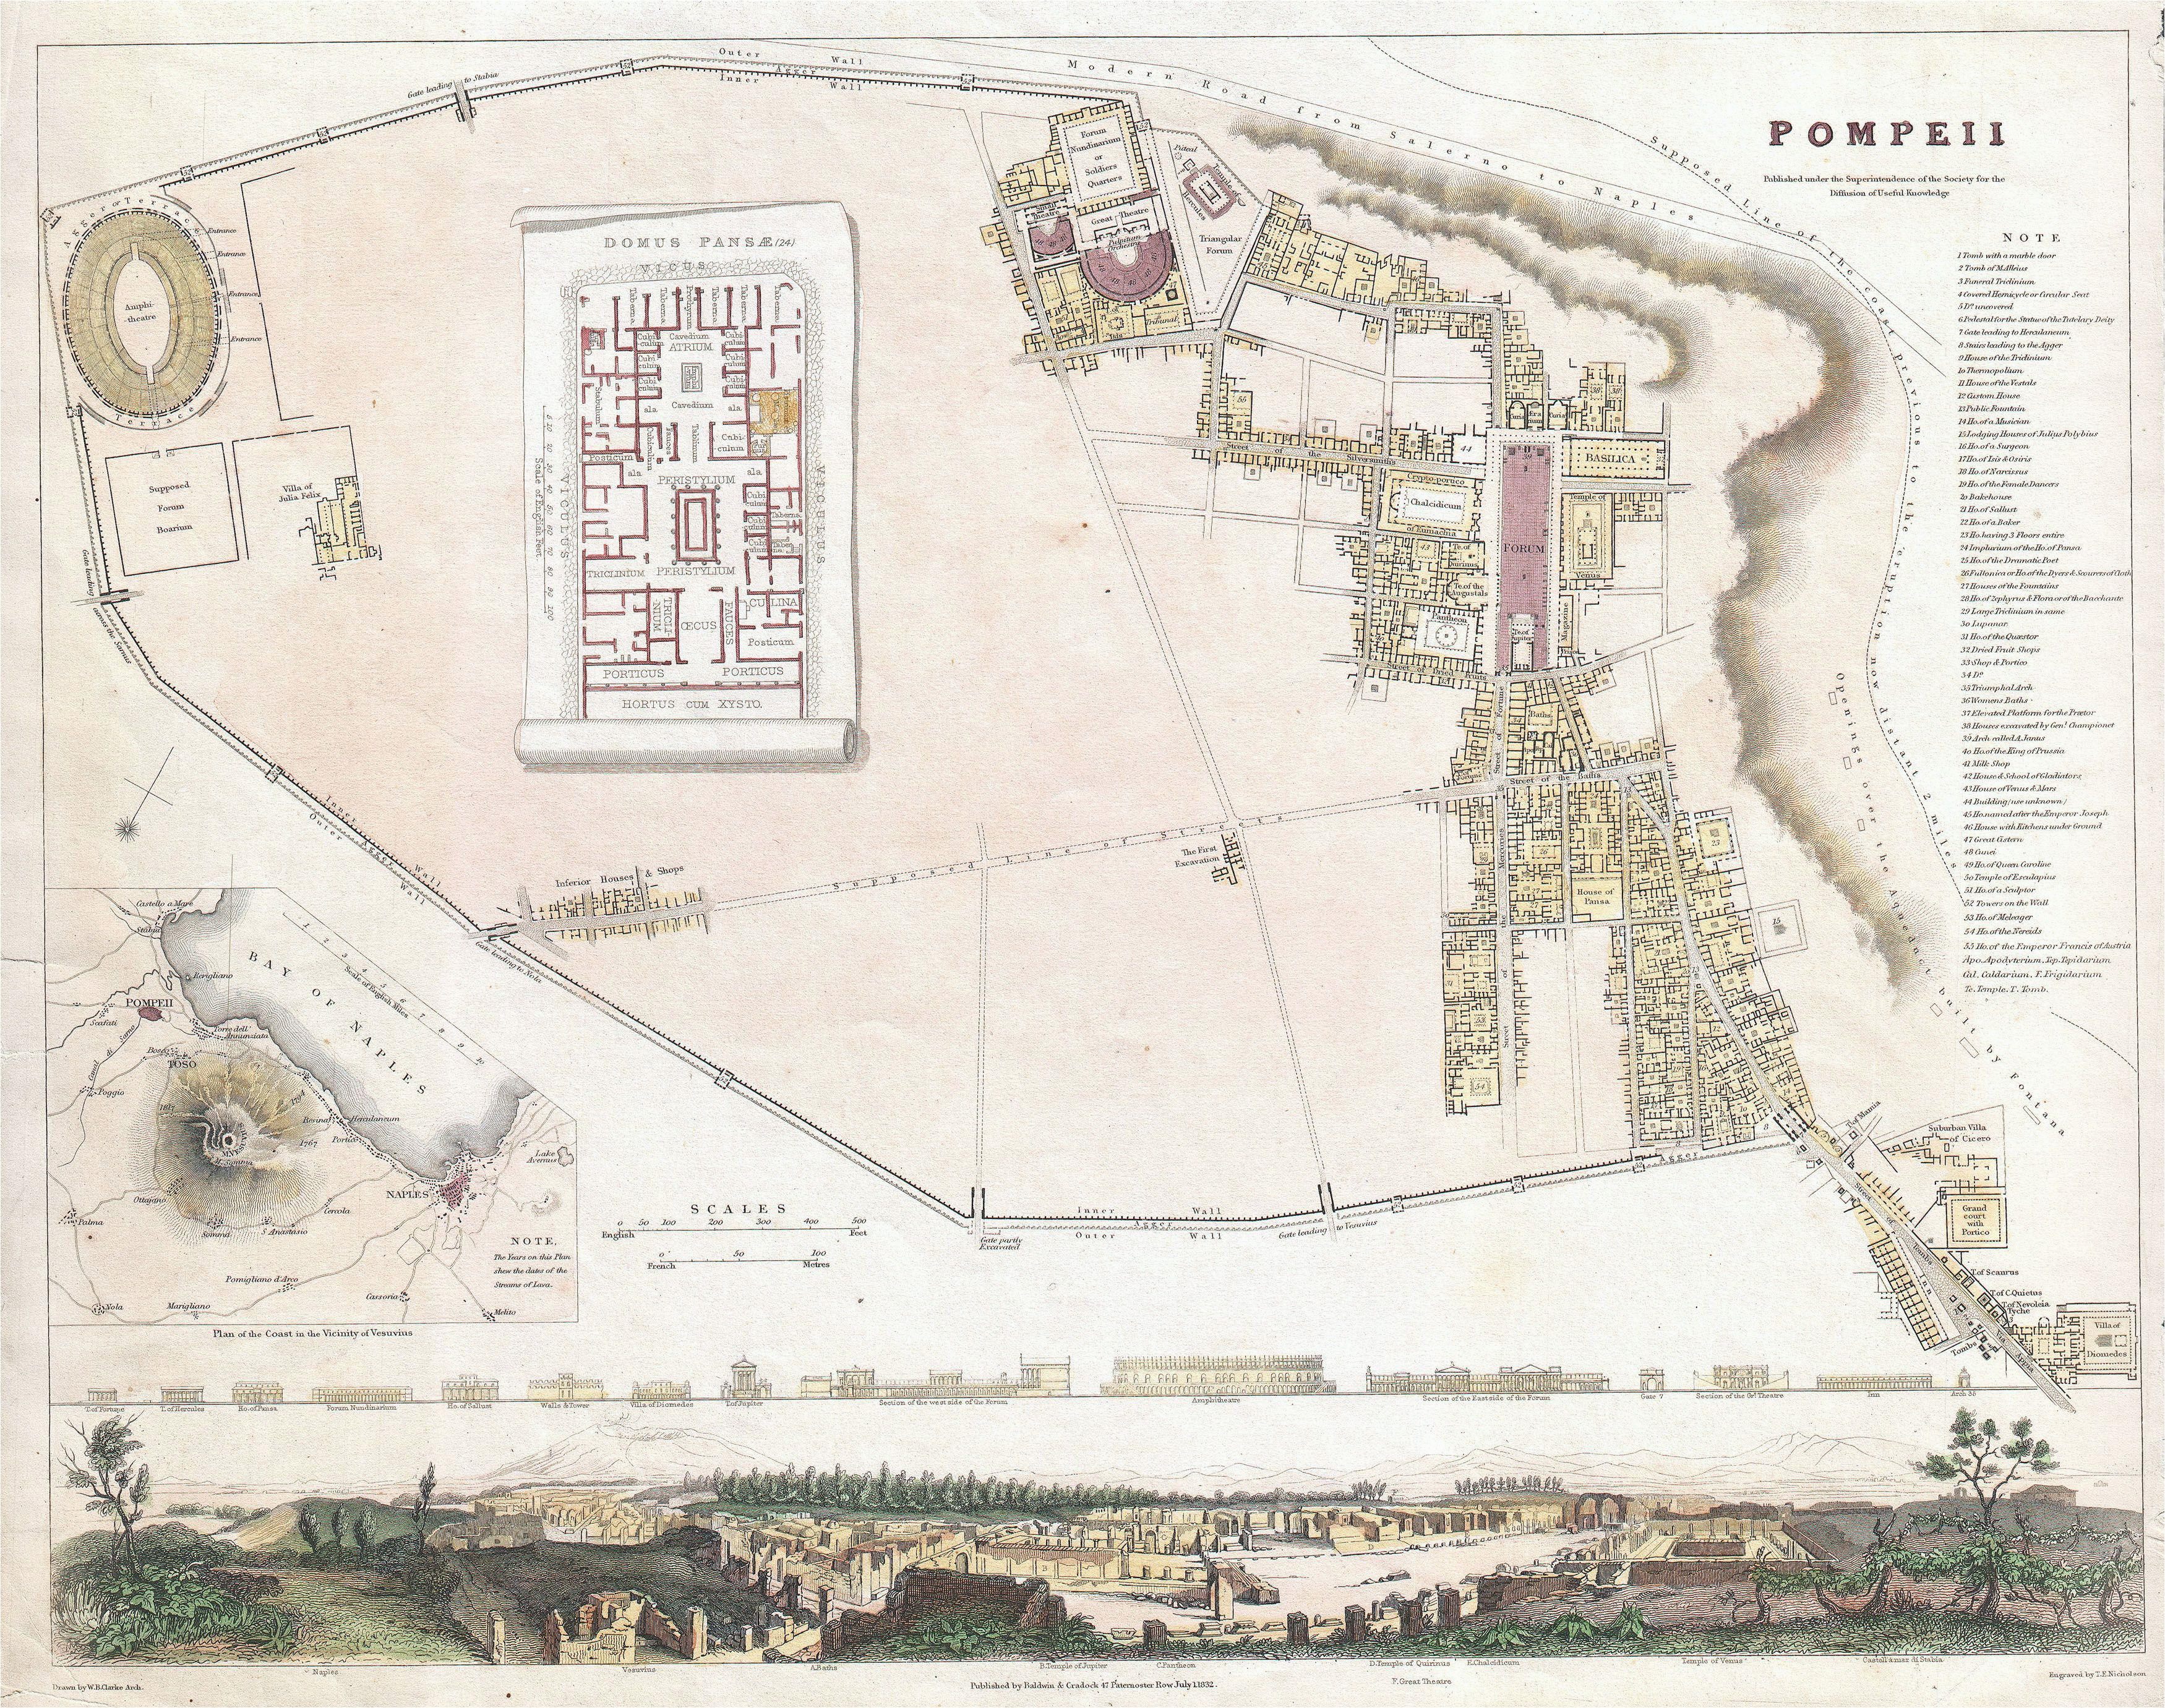 Pompei Italy Map File 1832 S D U K City Plan or Map Of Pompeii Italy Geographicus